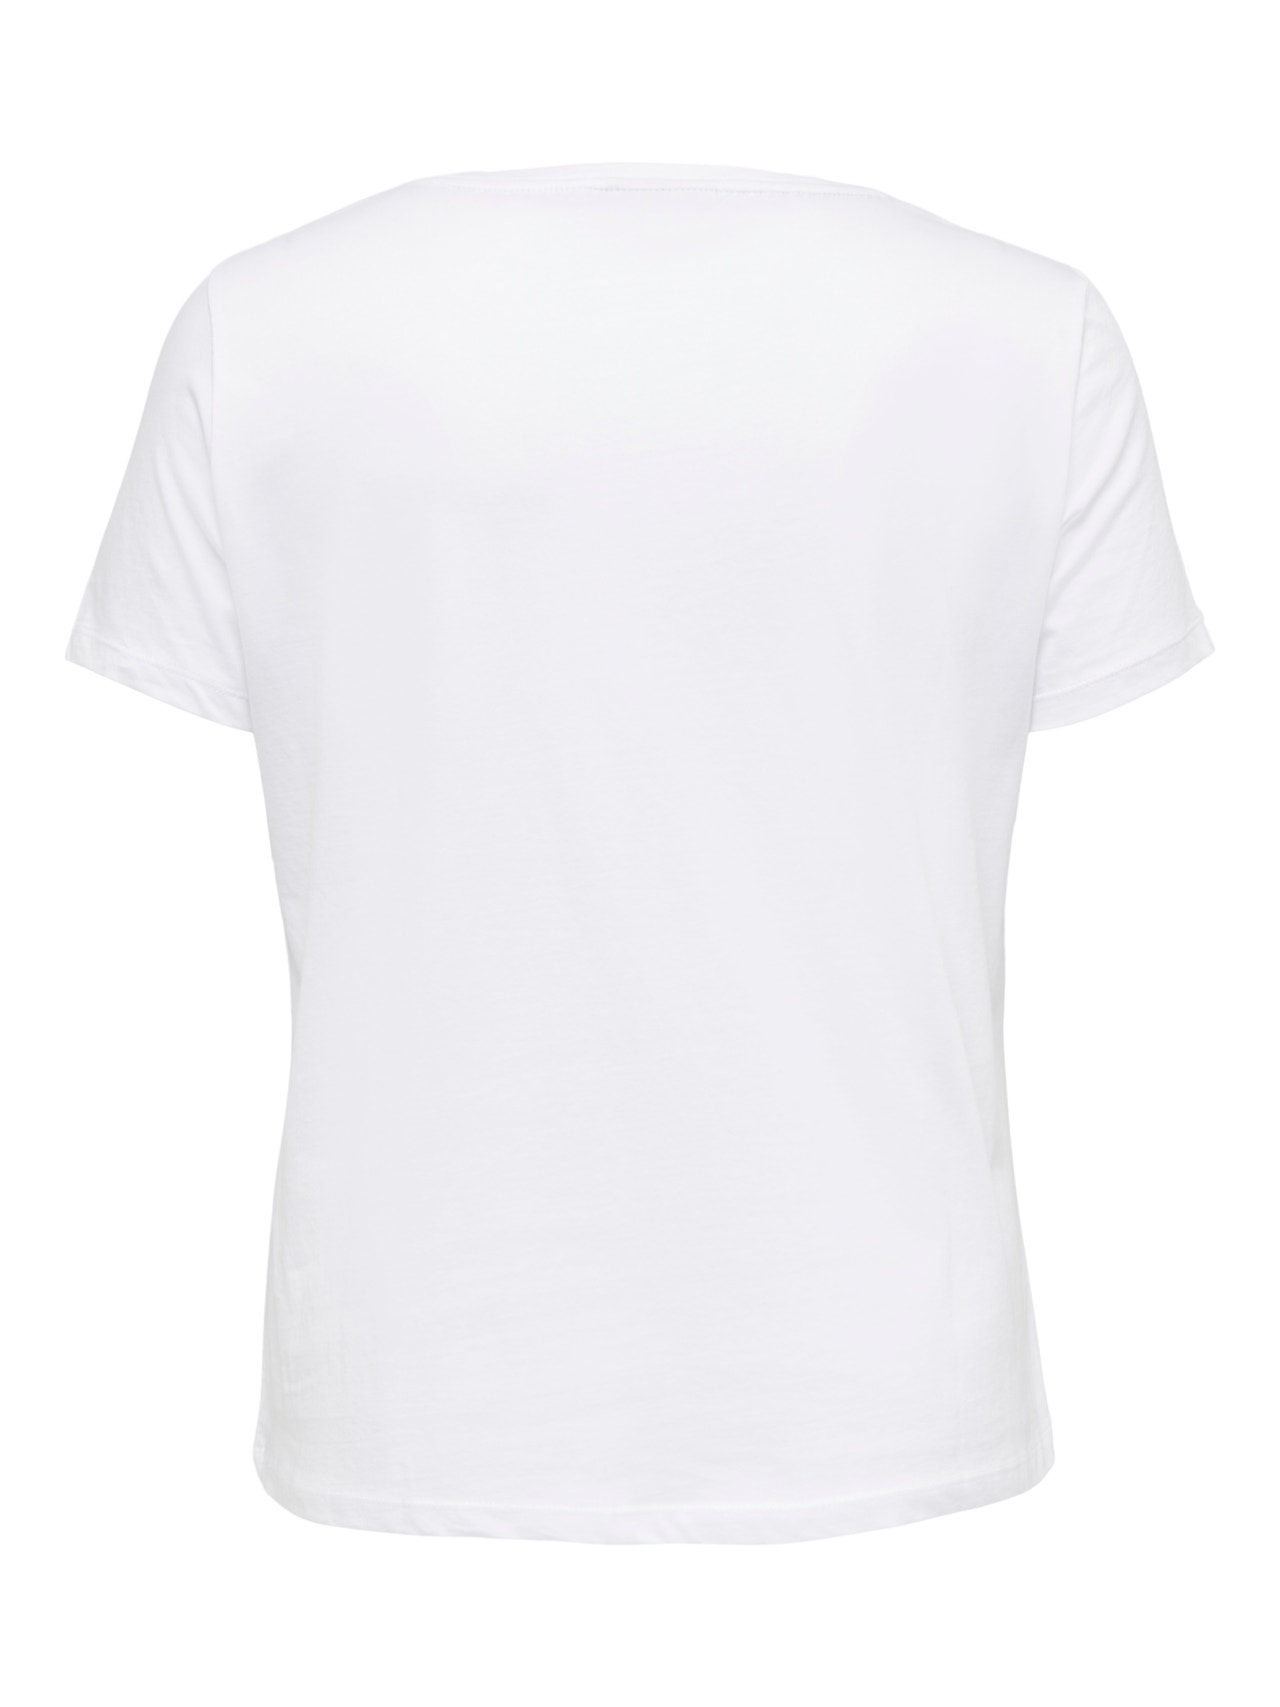 30% with Regular Fit | ONLY® discount! T-Shirt O-Neck